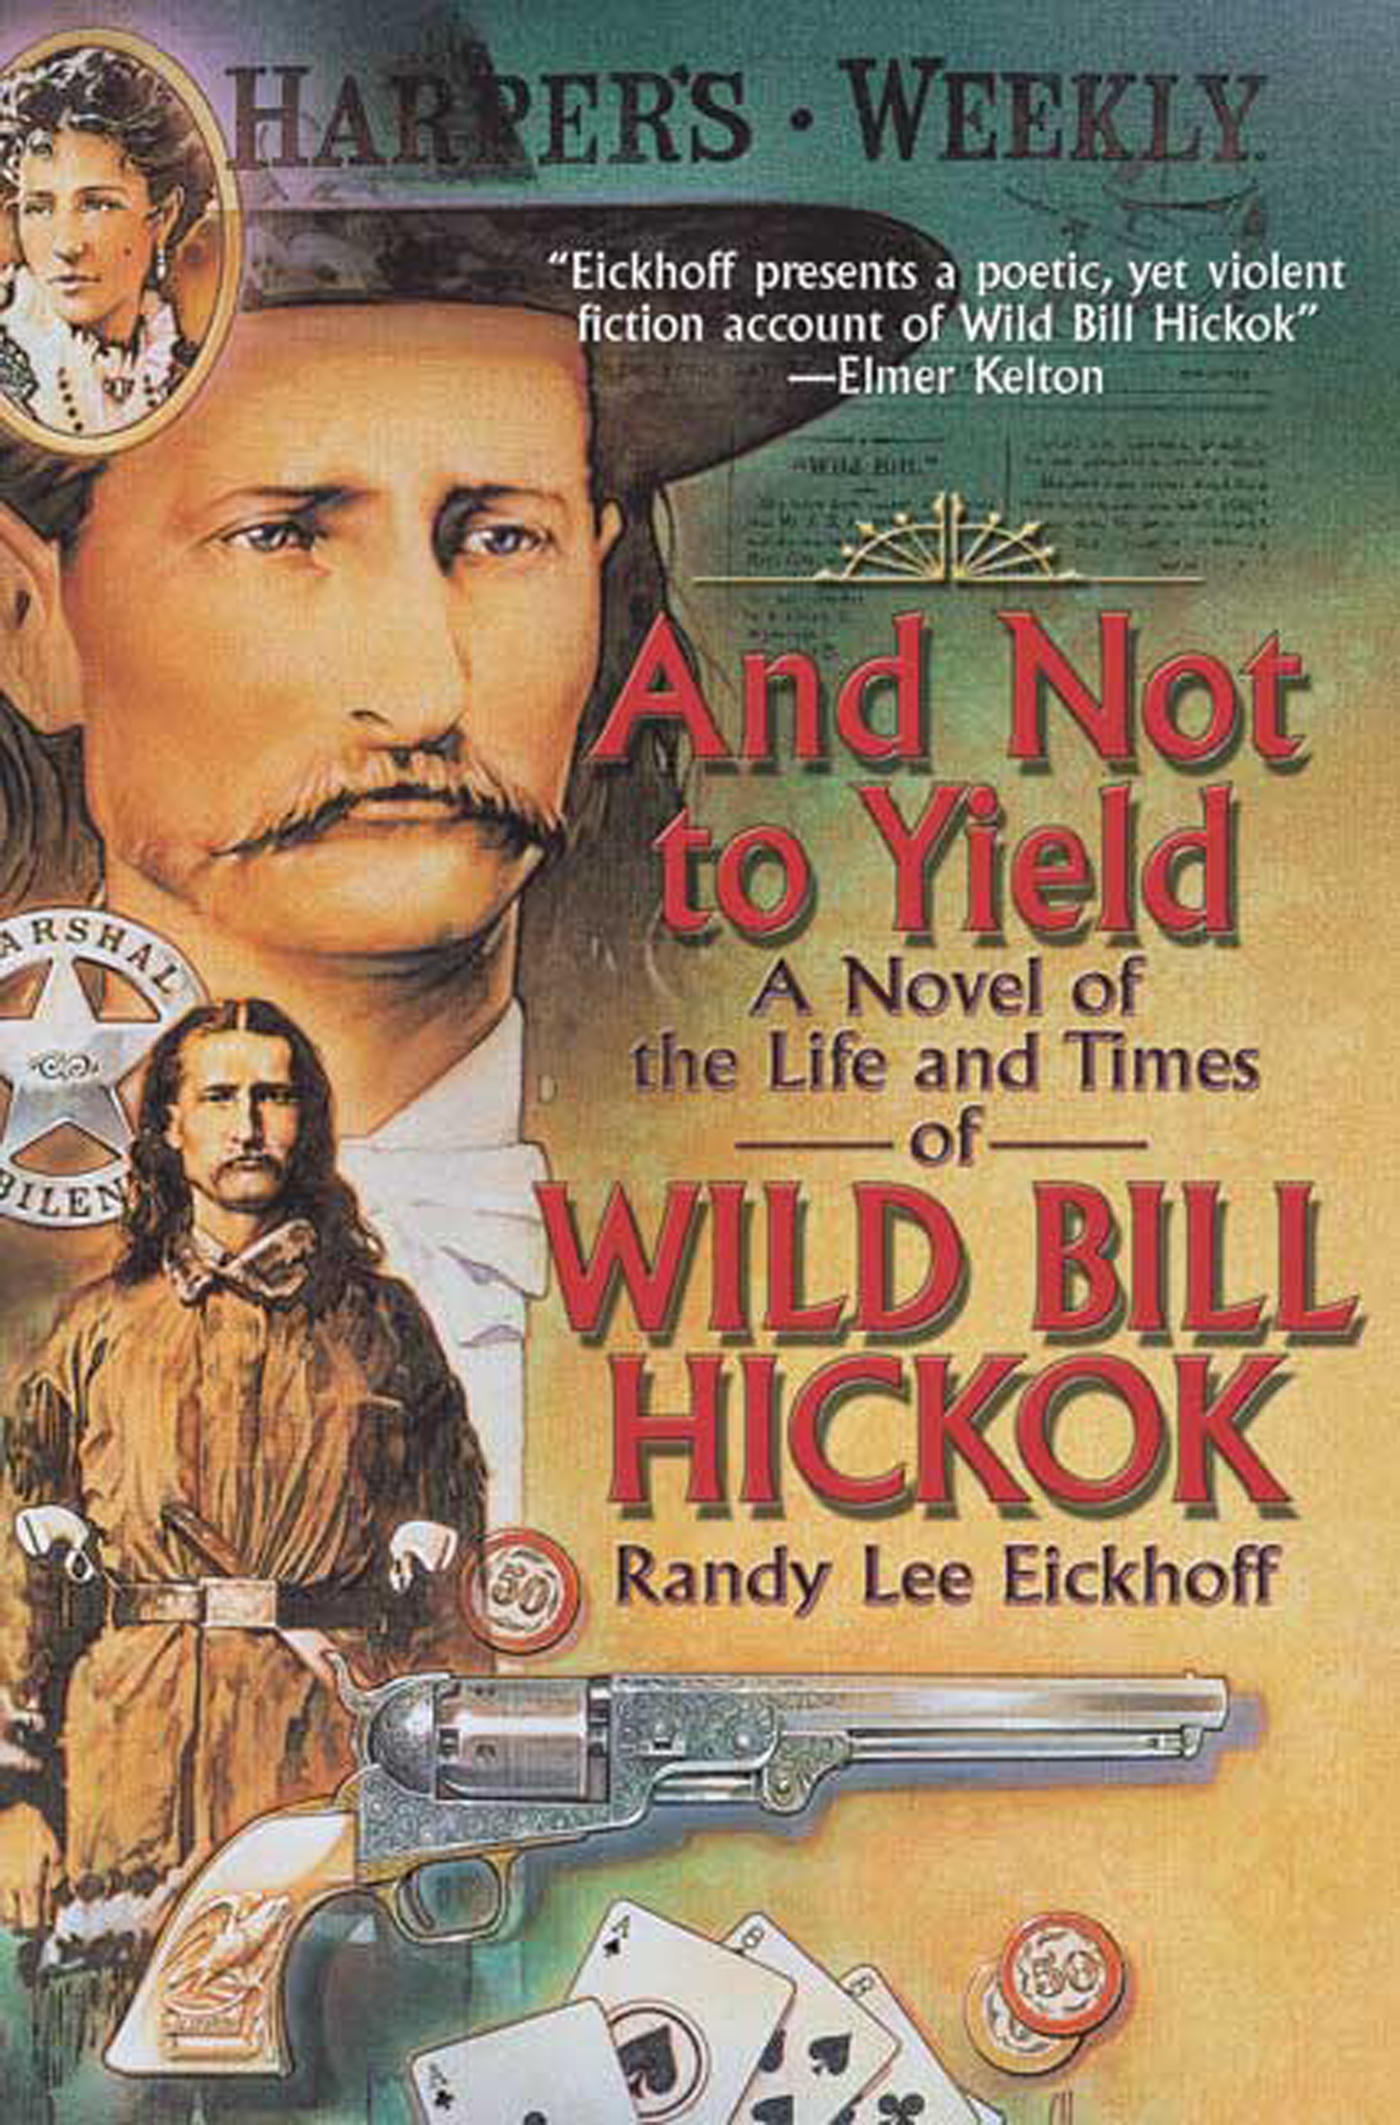 And Not to Yield : A Novel of the Life and Times of Wild Bill Hickok by Randy Lee Eickhoff